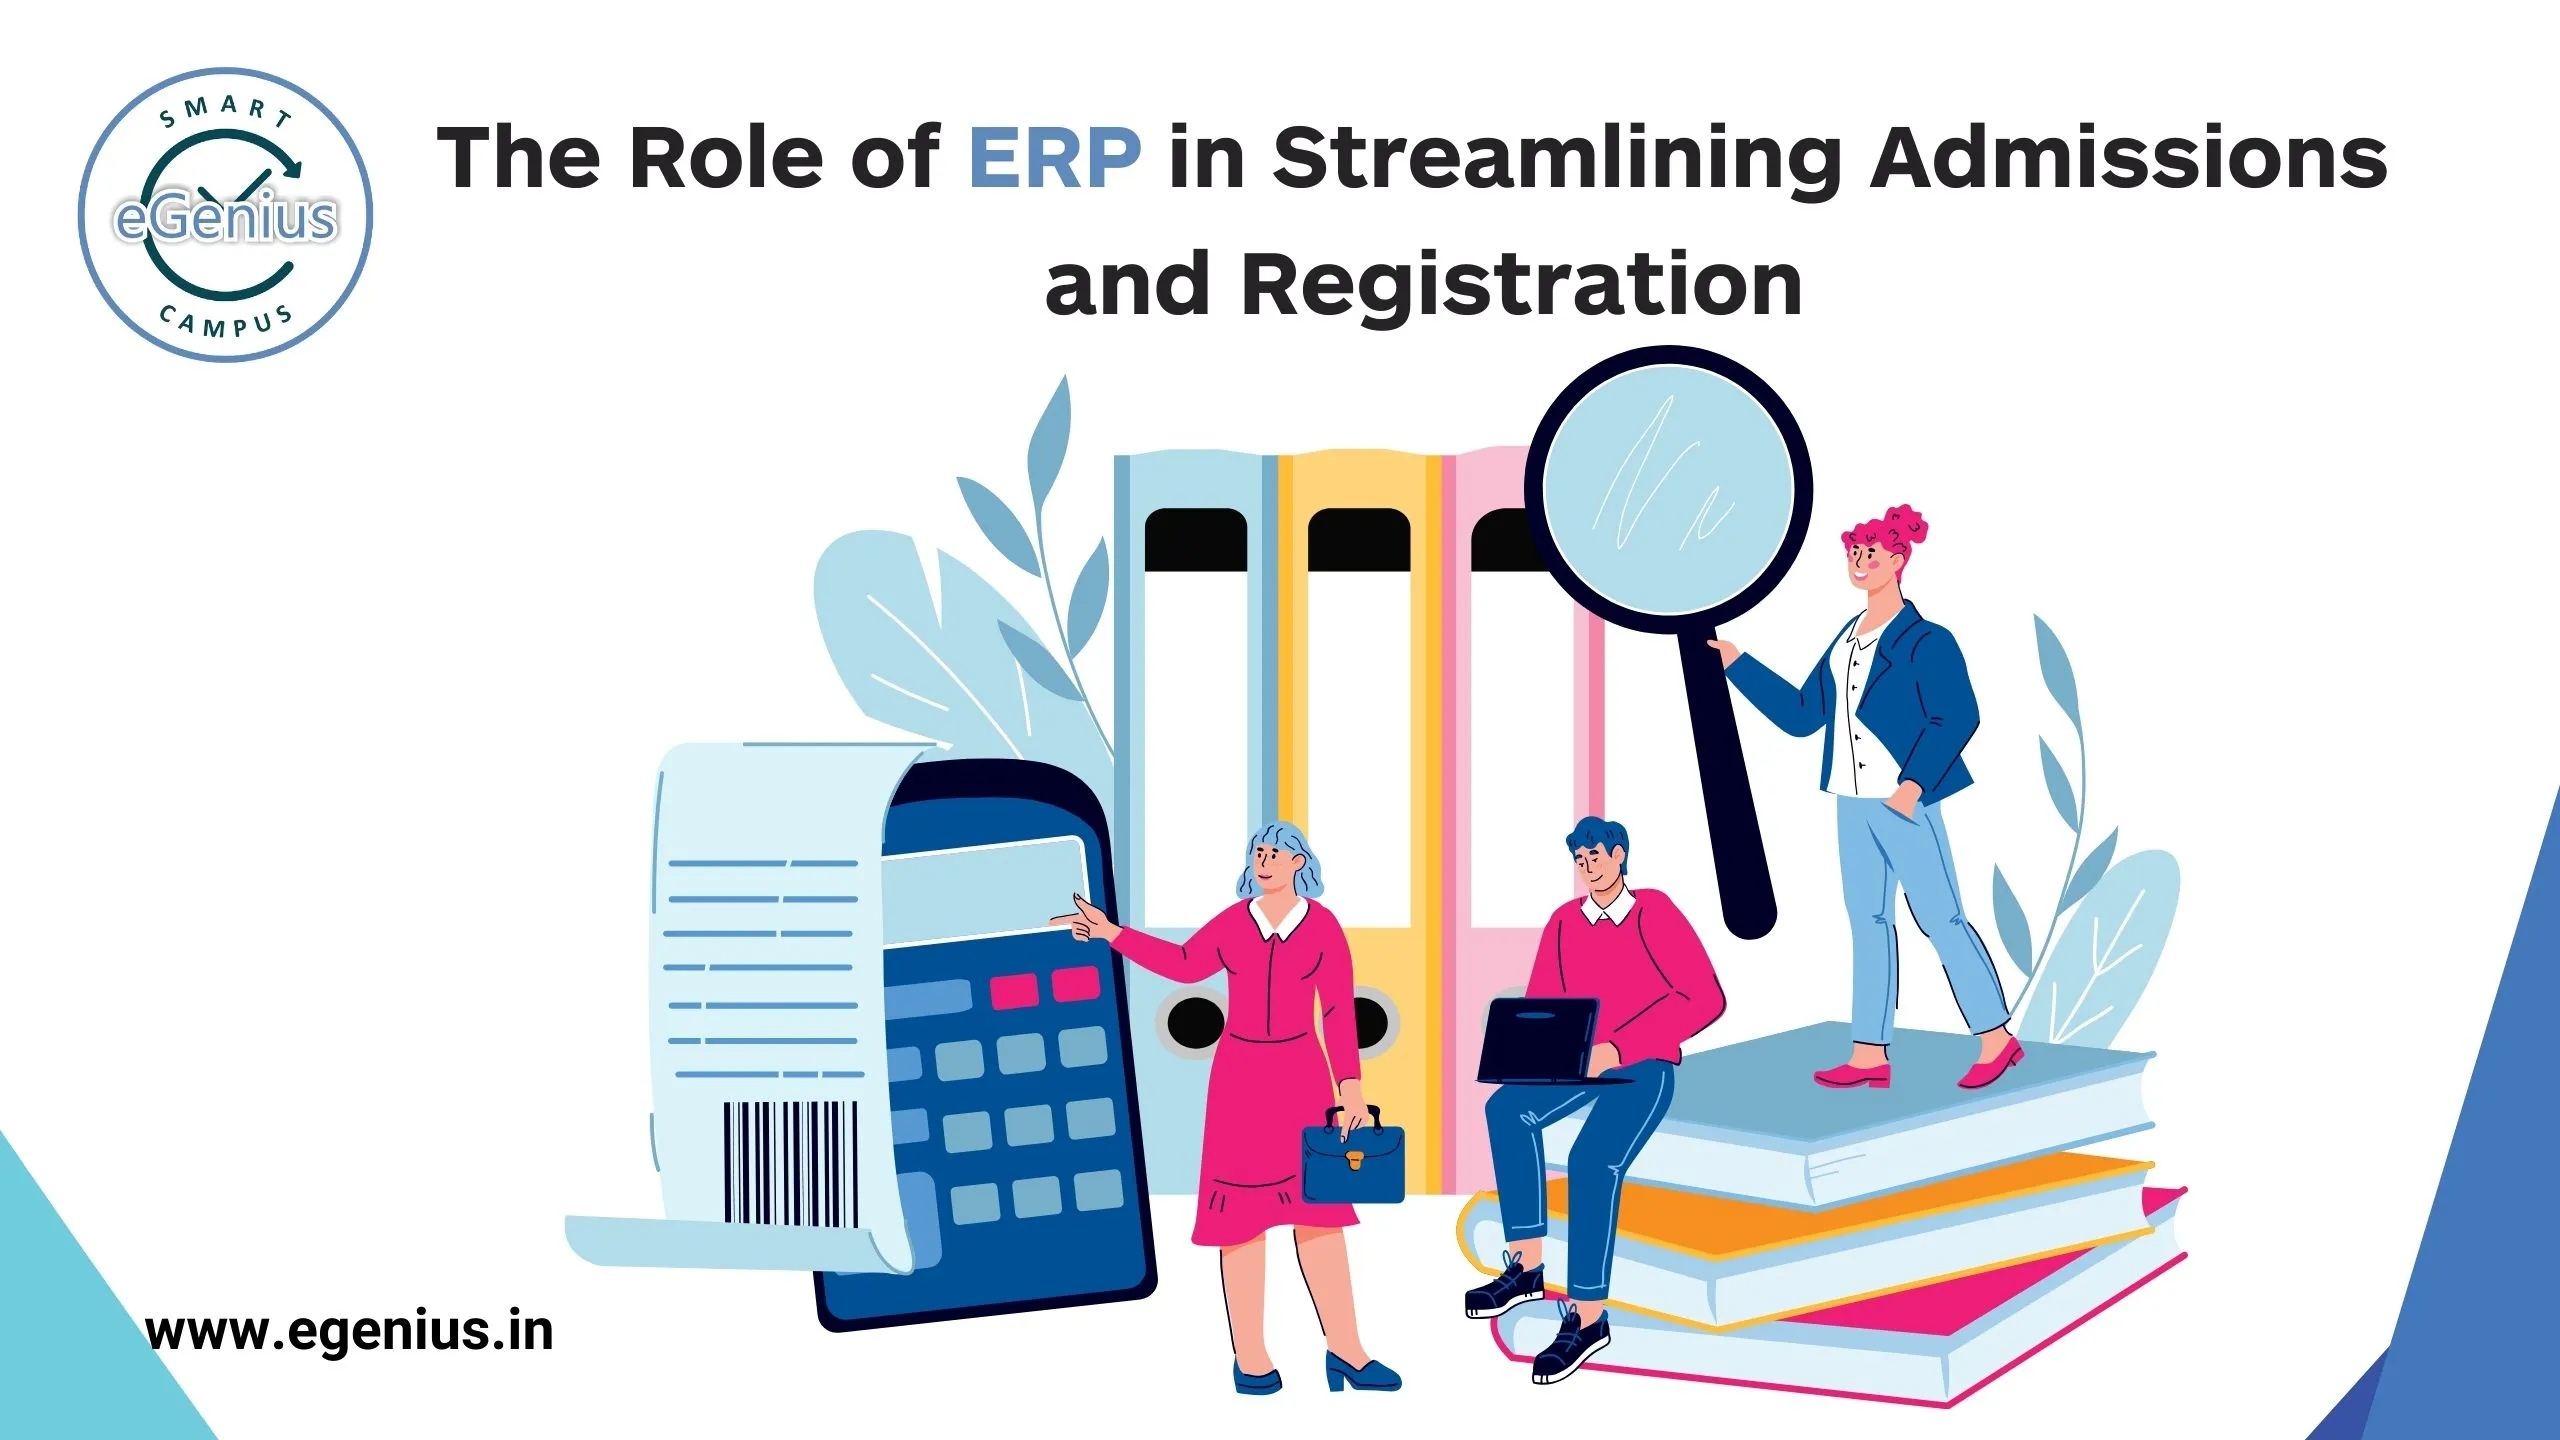 The Role of ERP in Streamlining Admissions and Registration 